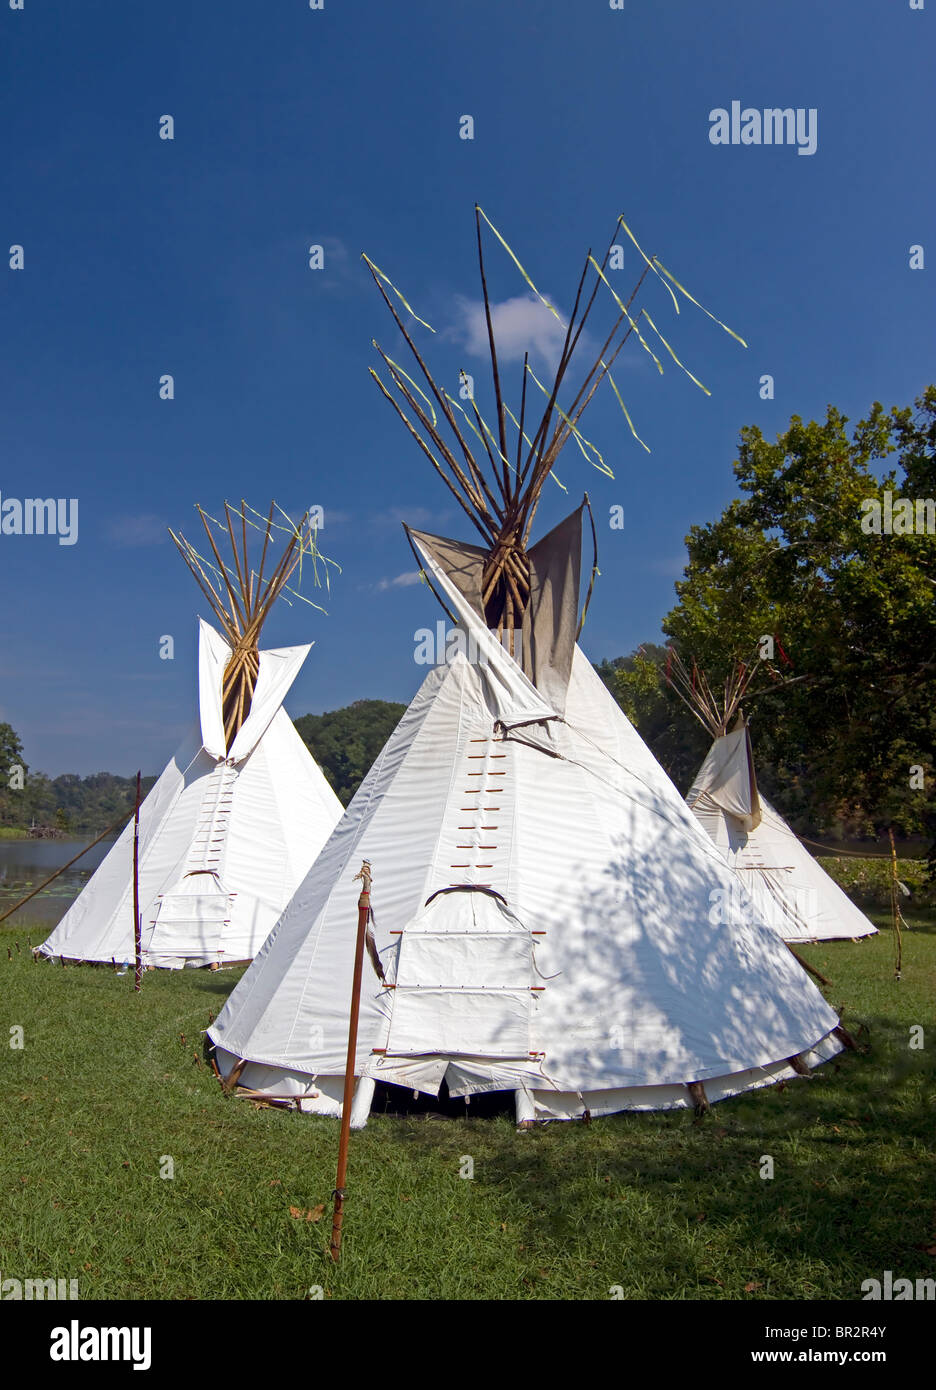 Dayton, Tennessee - Teepees set up by the participants in the annual powwow held in Dayton, TN Stock Photo